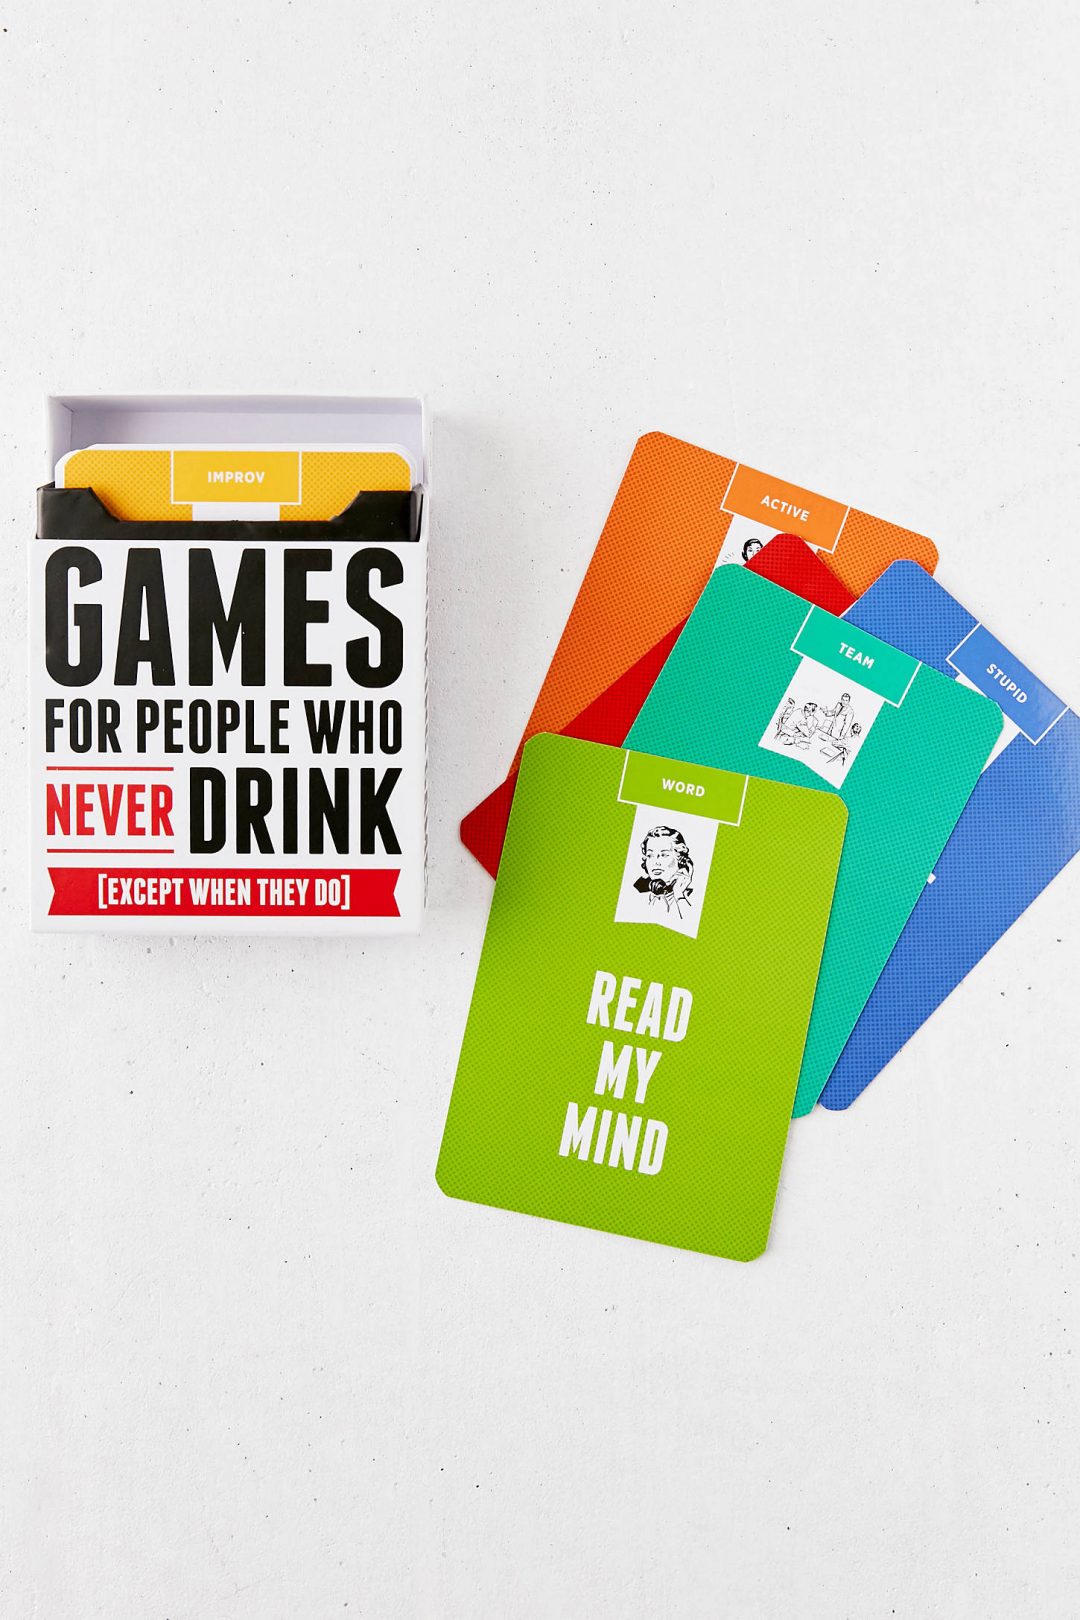 Drinking Games For People Who Never Drink